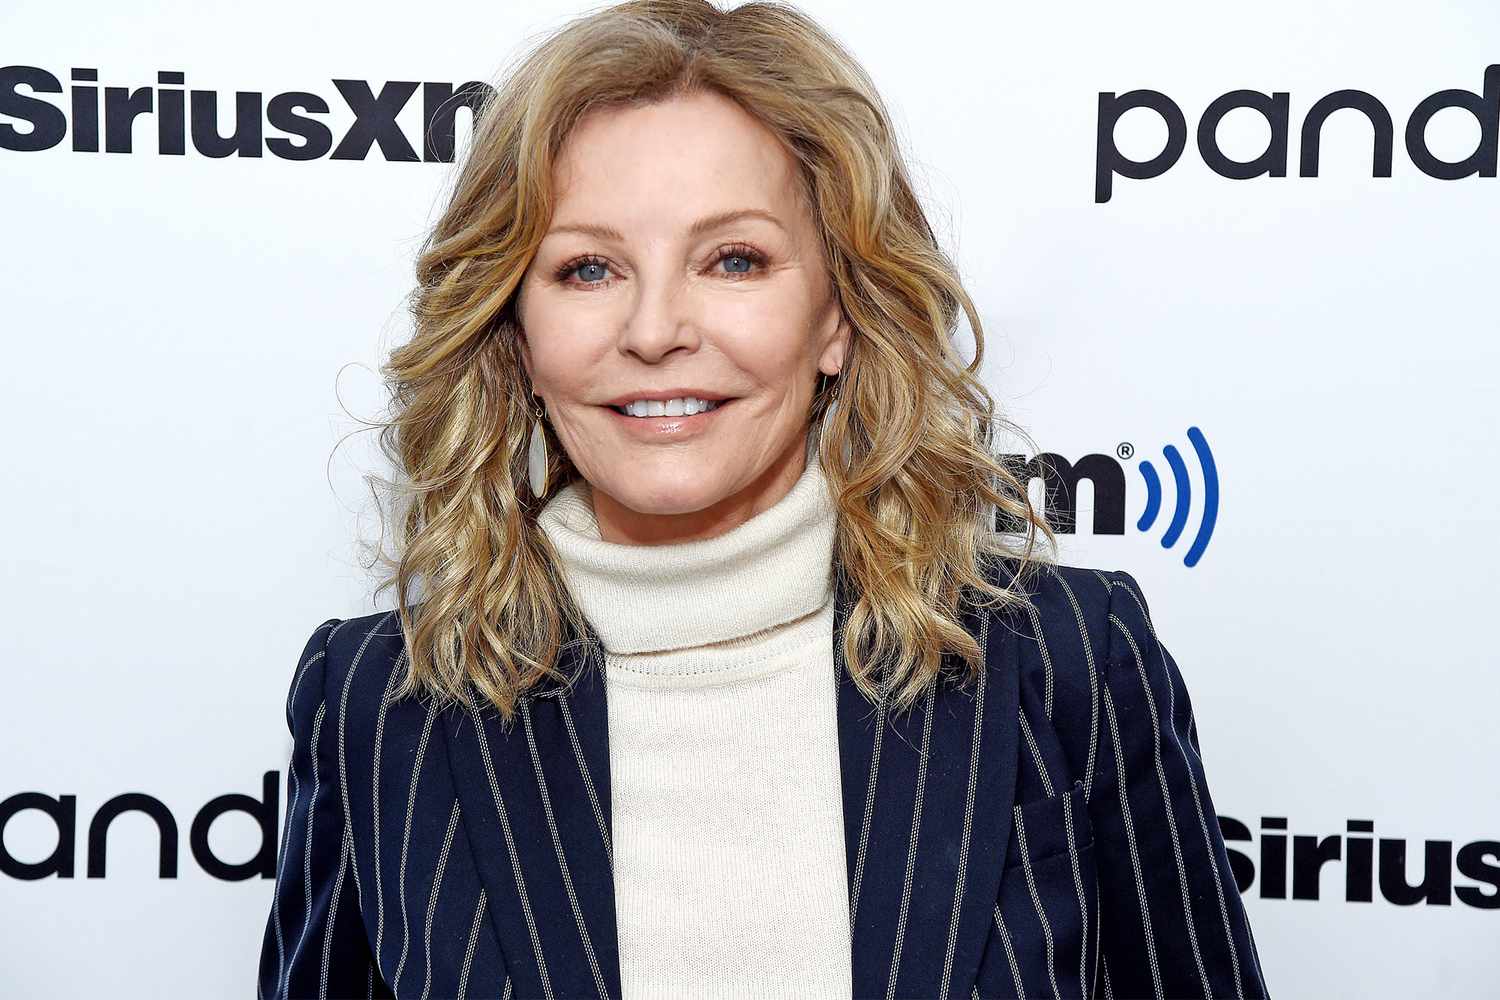 NEW YORK, NEW YORK - MARCH 11: (EXCLUSIVE COVERAGE) Cheryl Ladd visits SiriusXM at SiriusXM Studios on March 11, 2020 in New York City. (Photo by Jamie McCarthy/Getty Images)